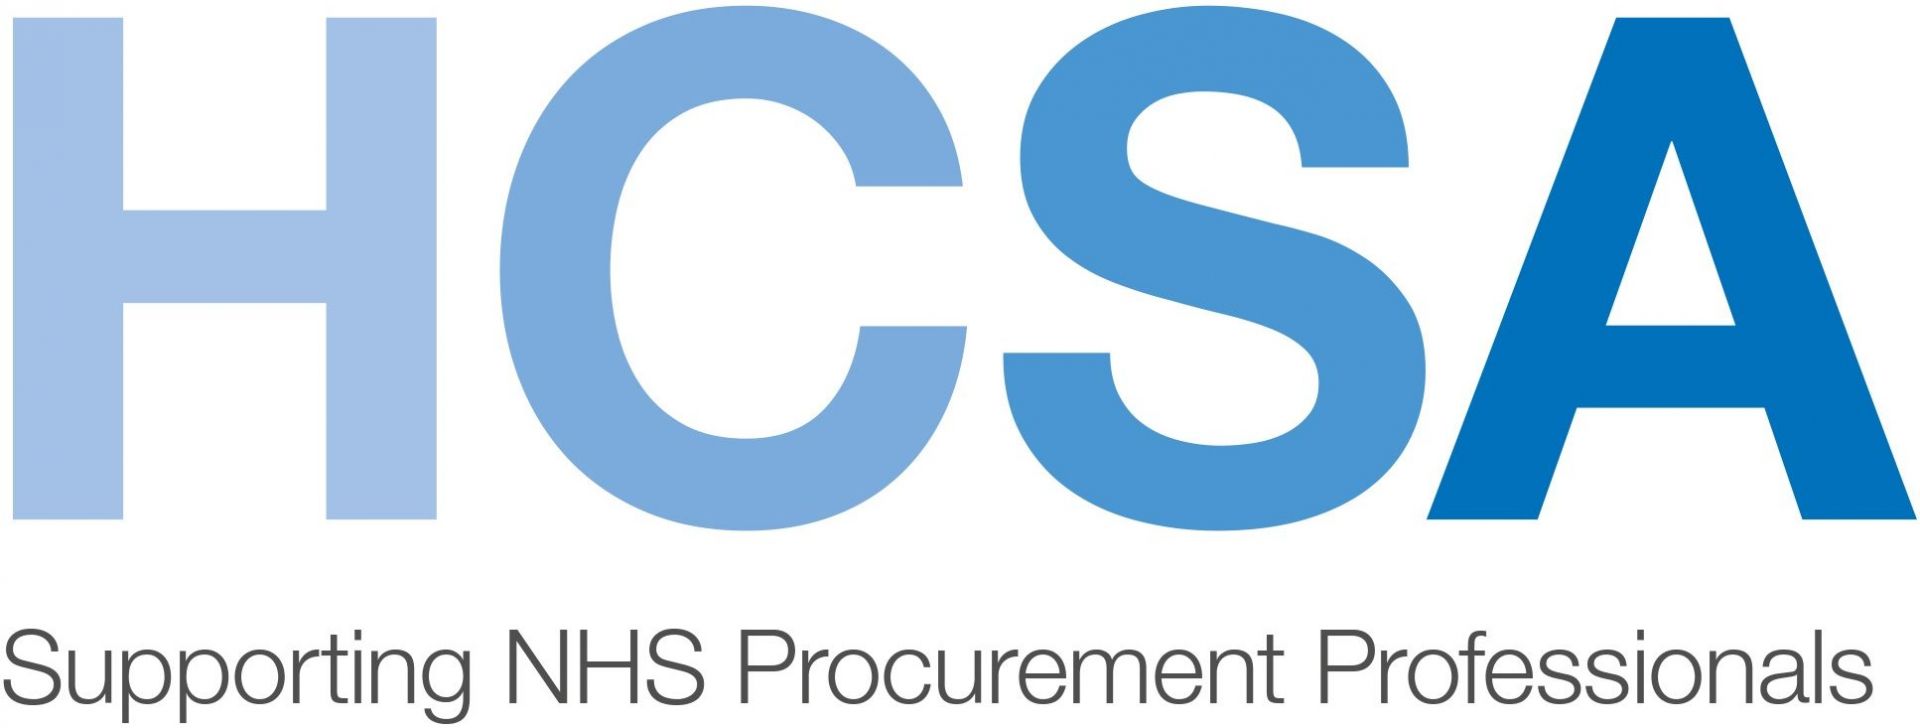 logo of the hcsa (health care supply association) supporting NHS procurement professionals